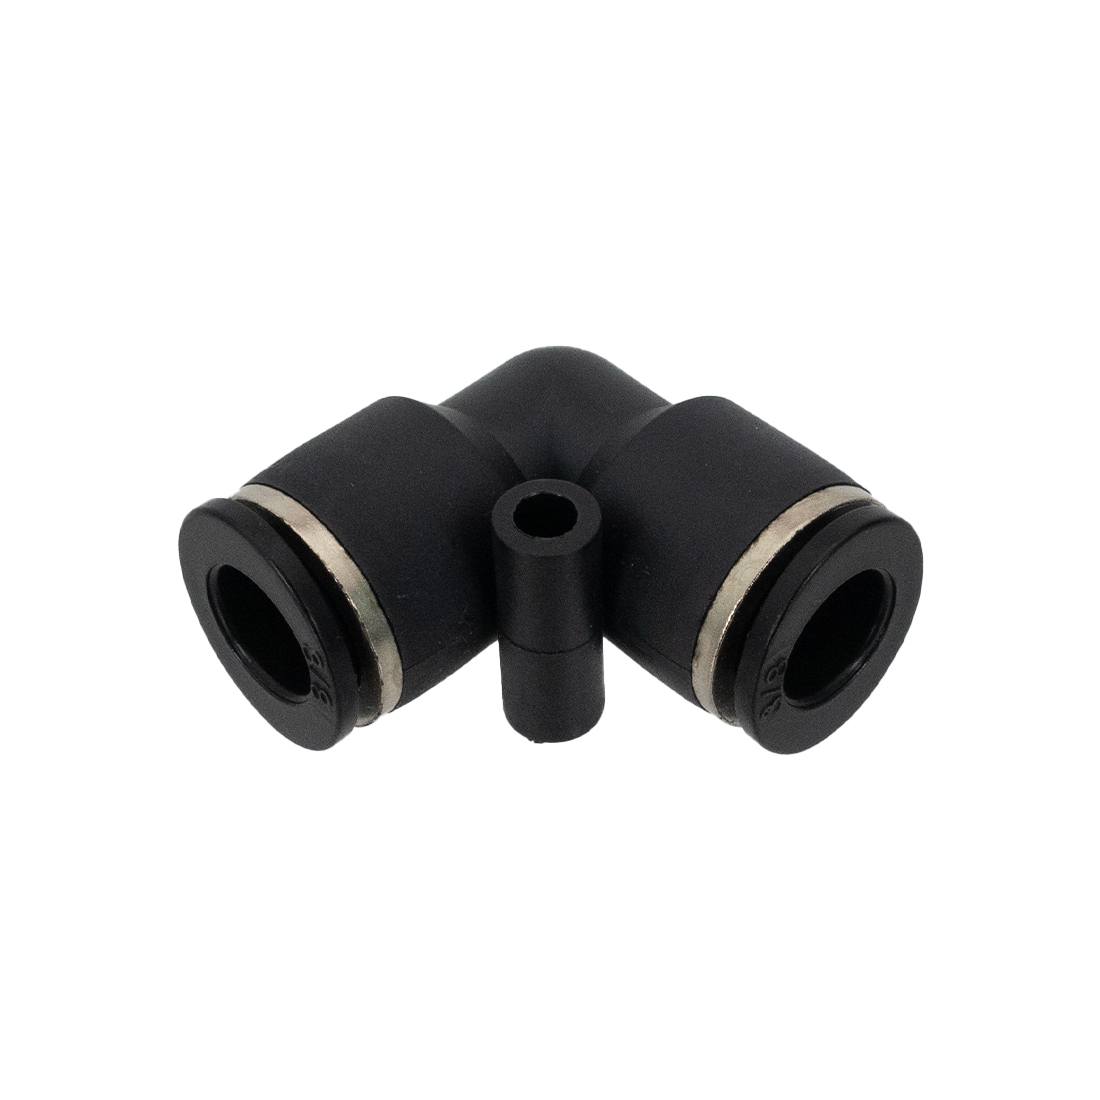 XERO Push-to-Fit Elbow Fitting Top View